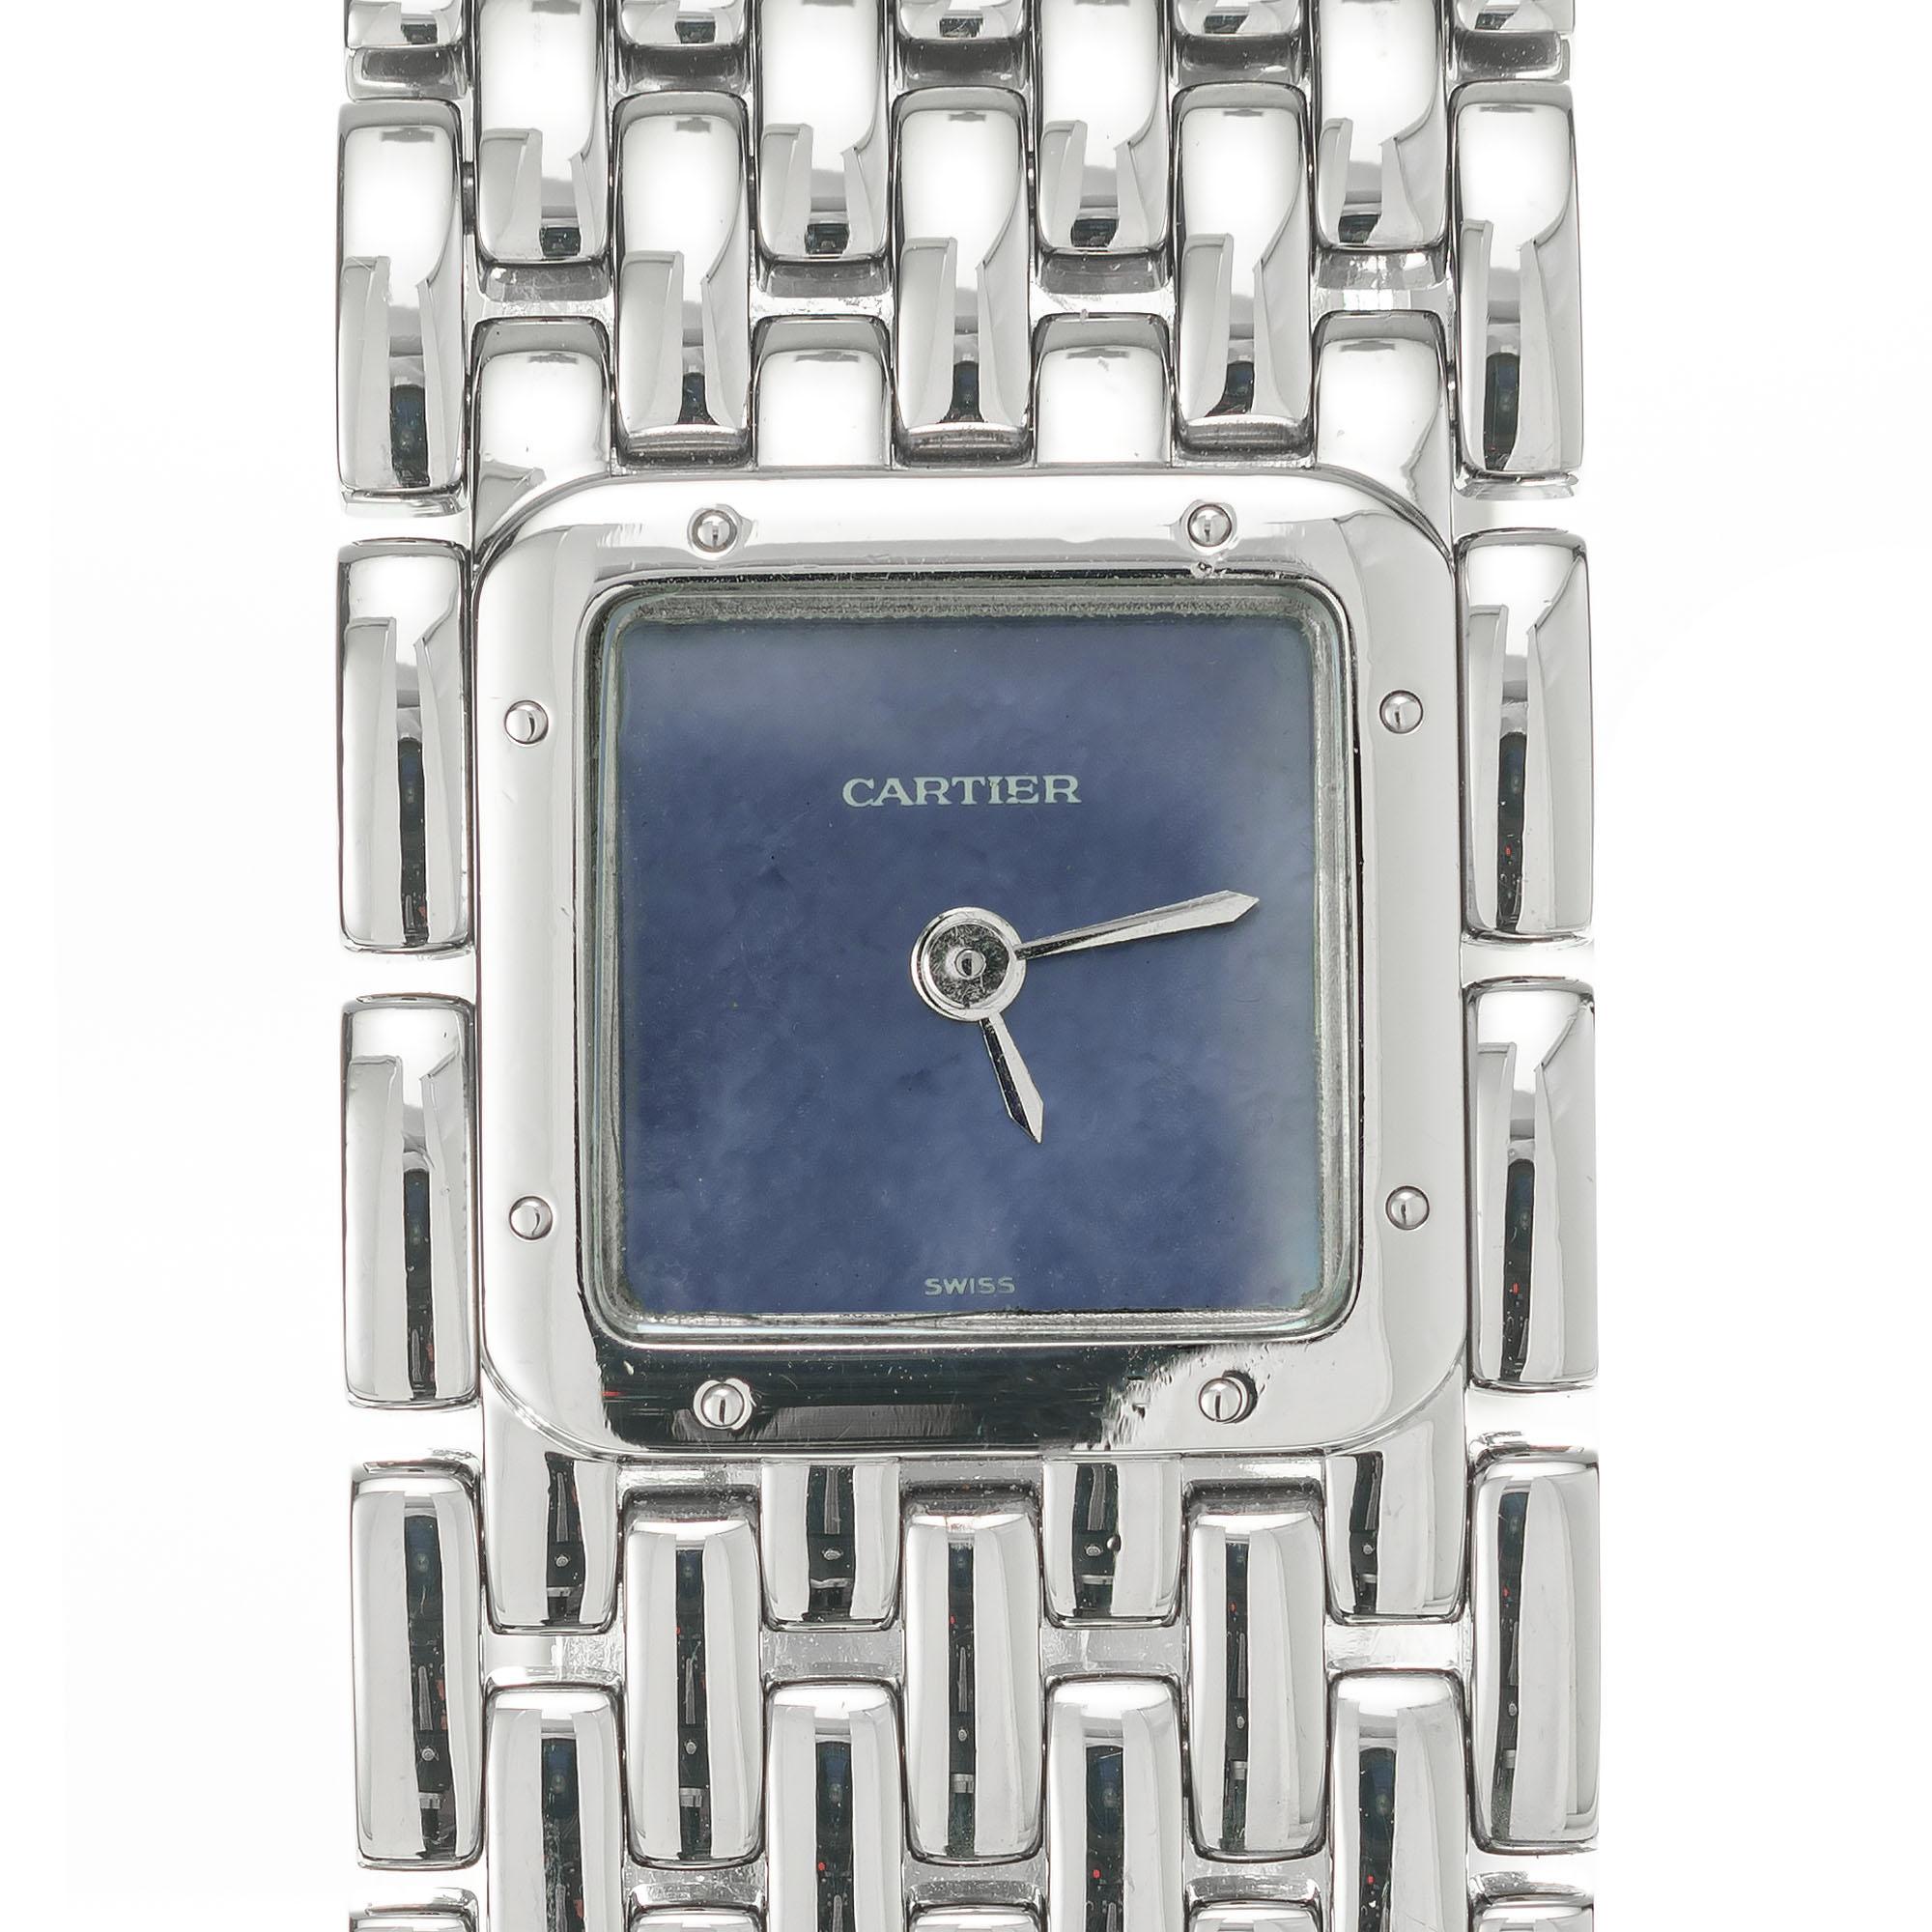 Cartier ladies Stainless Steel Ruban with blue mother of pearl dial and quartz. Cartier movement. Back set. 7 Inches in length- can be shortened 

75.3 grams
Length: 22mm
Width: 21mm
Band width at case: 21mm
Case thickness: 6.30mm
Band: Stainless